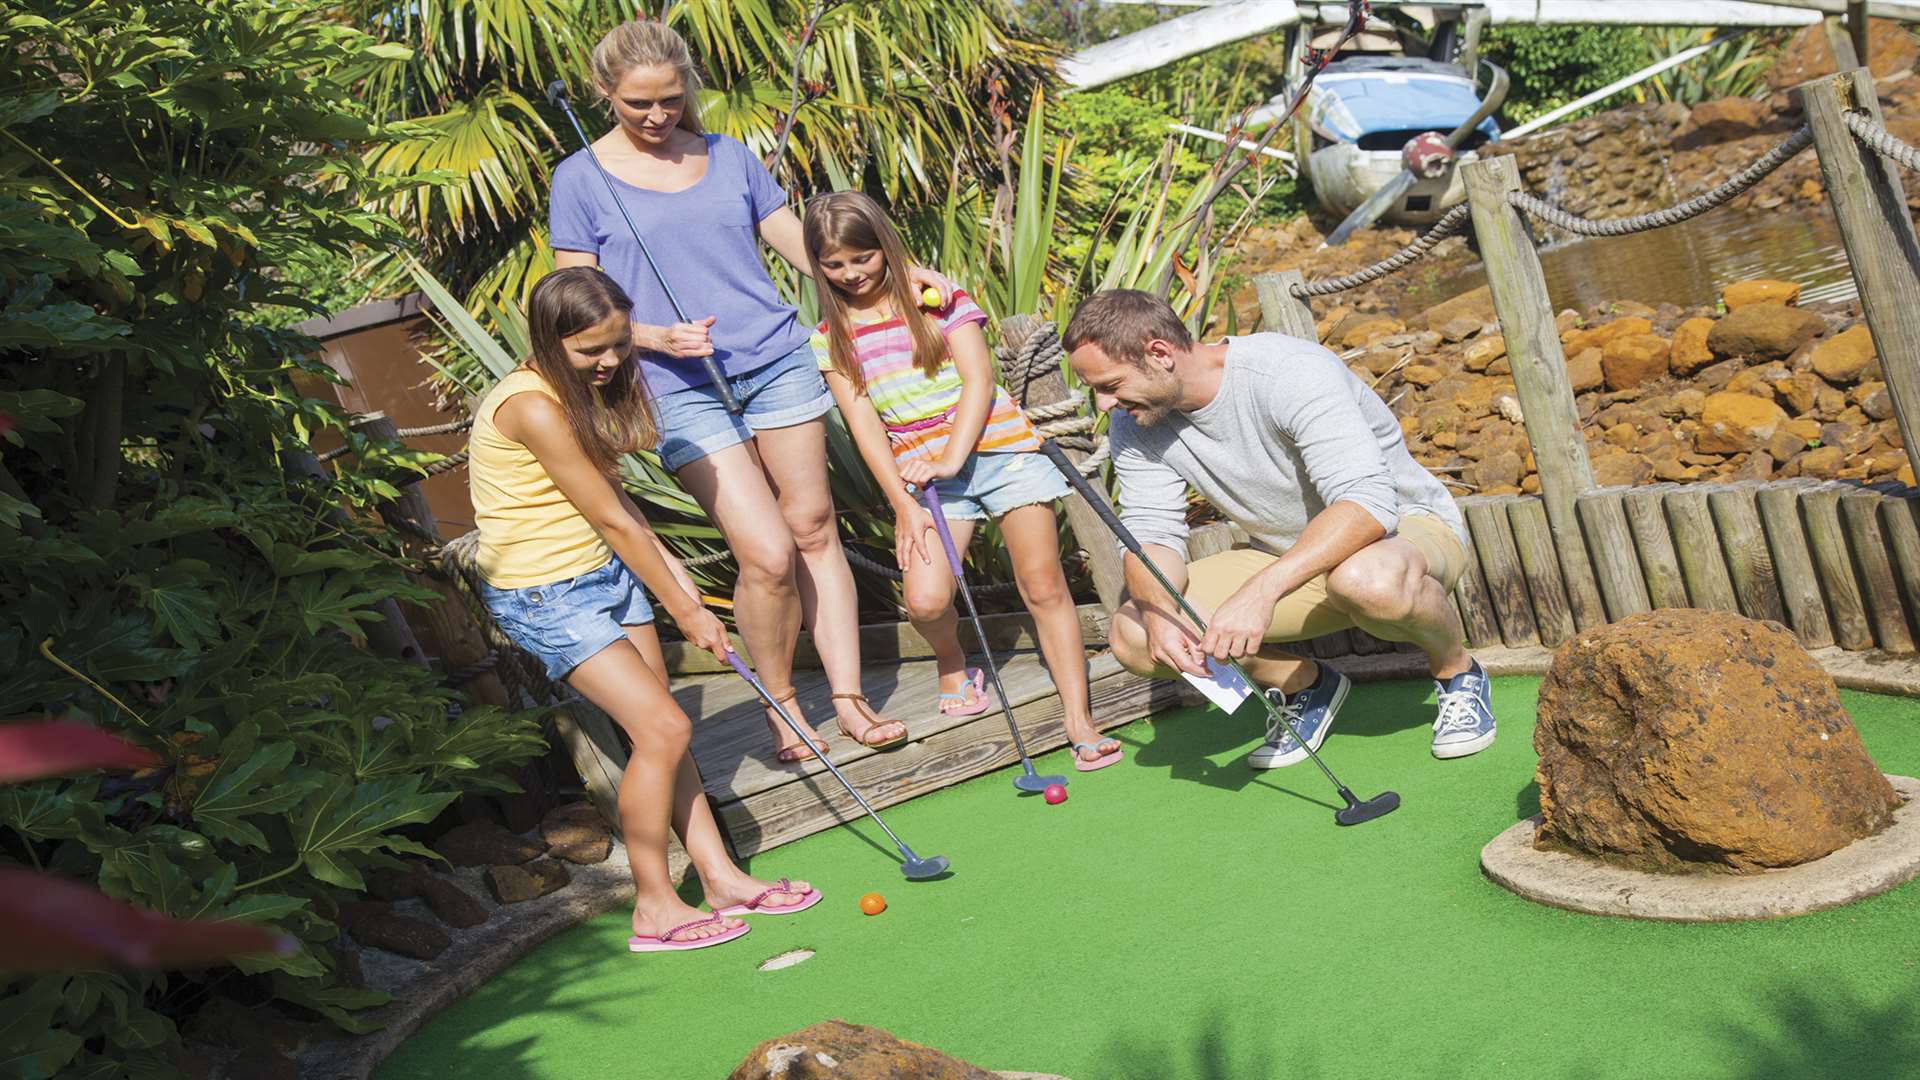 A family enjoying a round of crazy golf at the park.